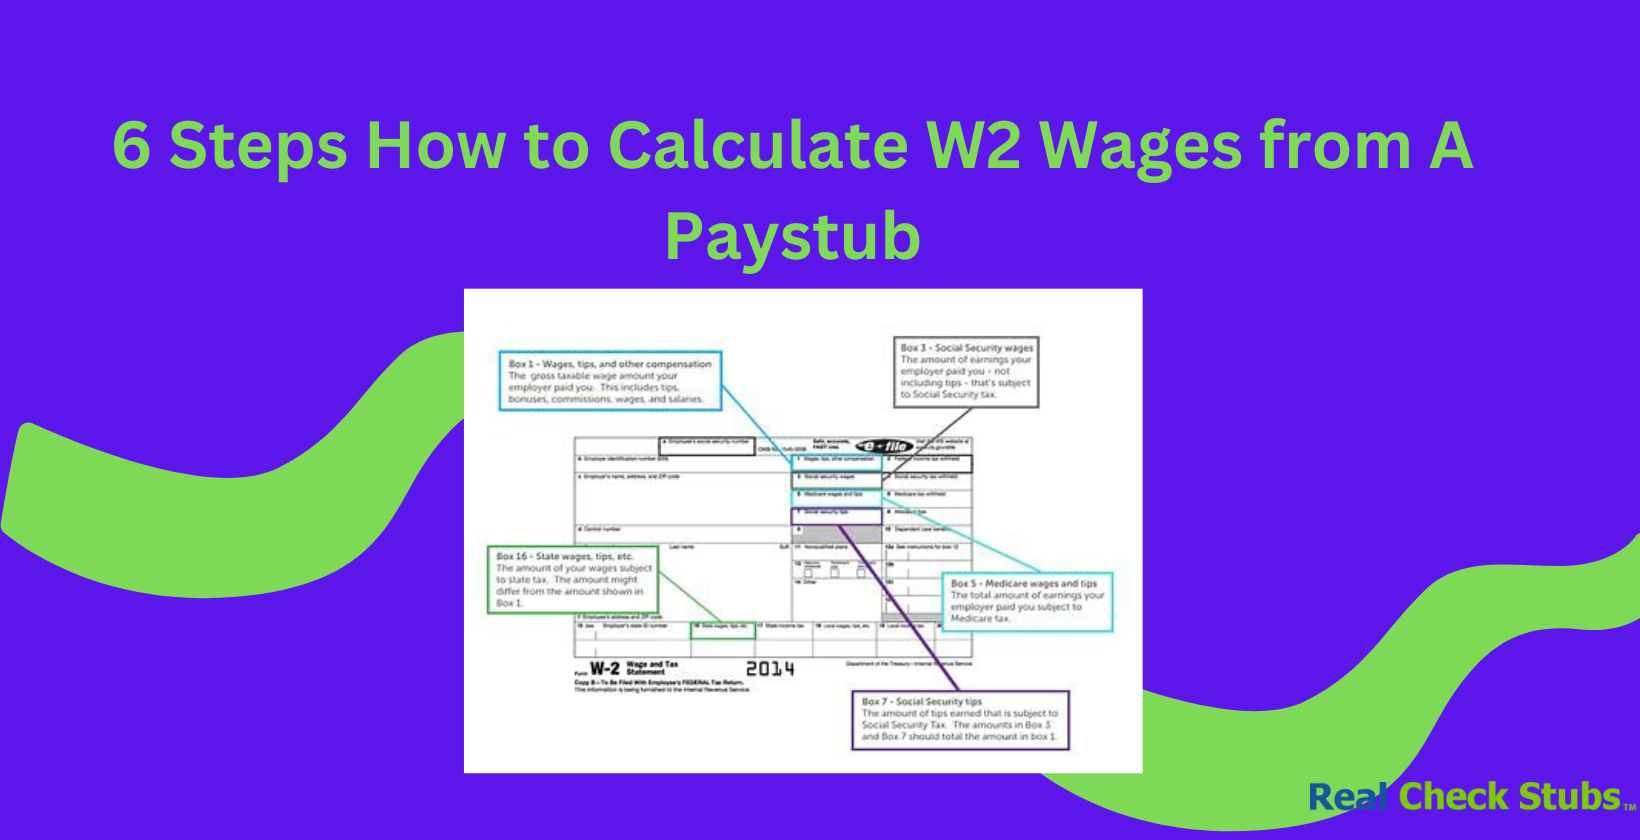 6 steps to quickly calculate your w2 wages from your paystub